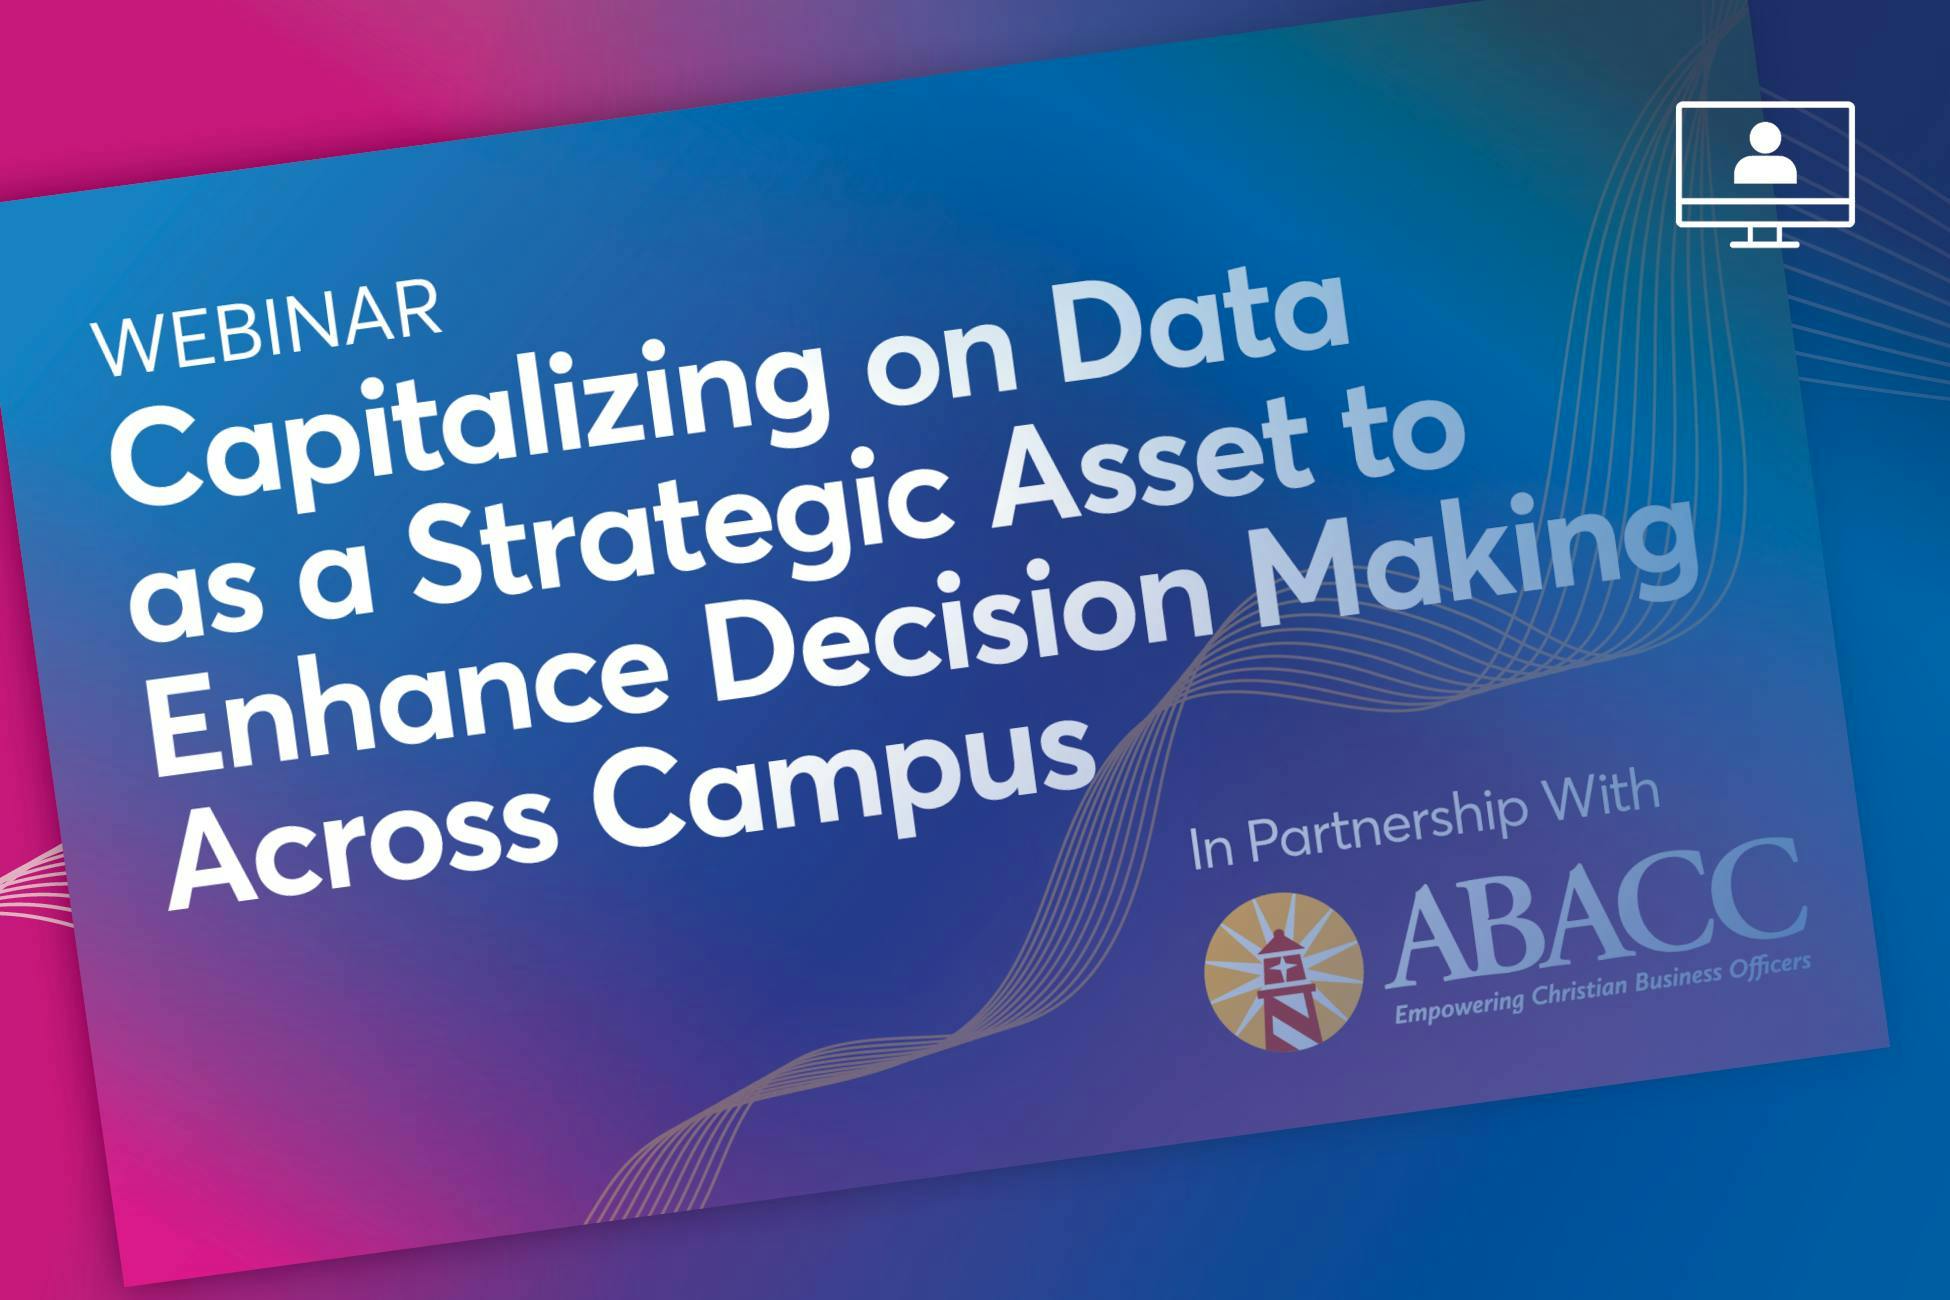 Capitalizing on Data as Strategic Asset to Enhance Decision Making Across Campus